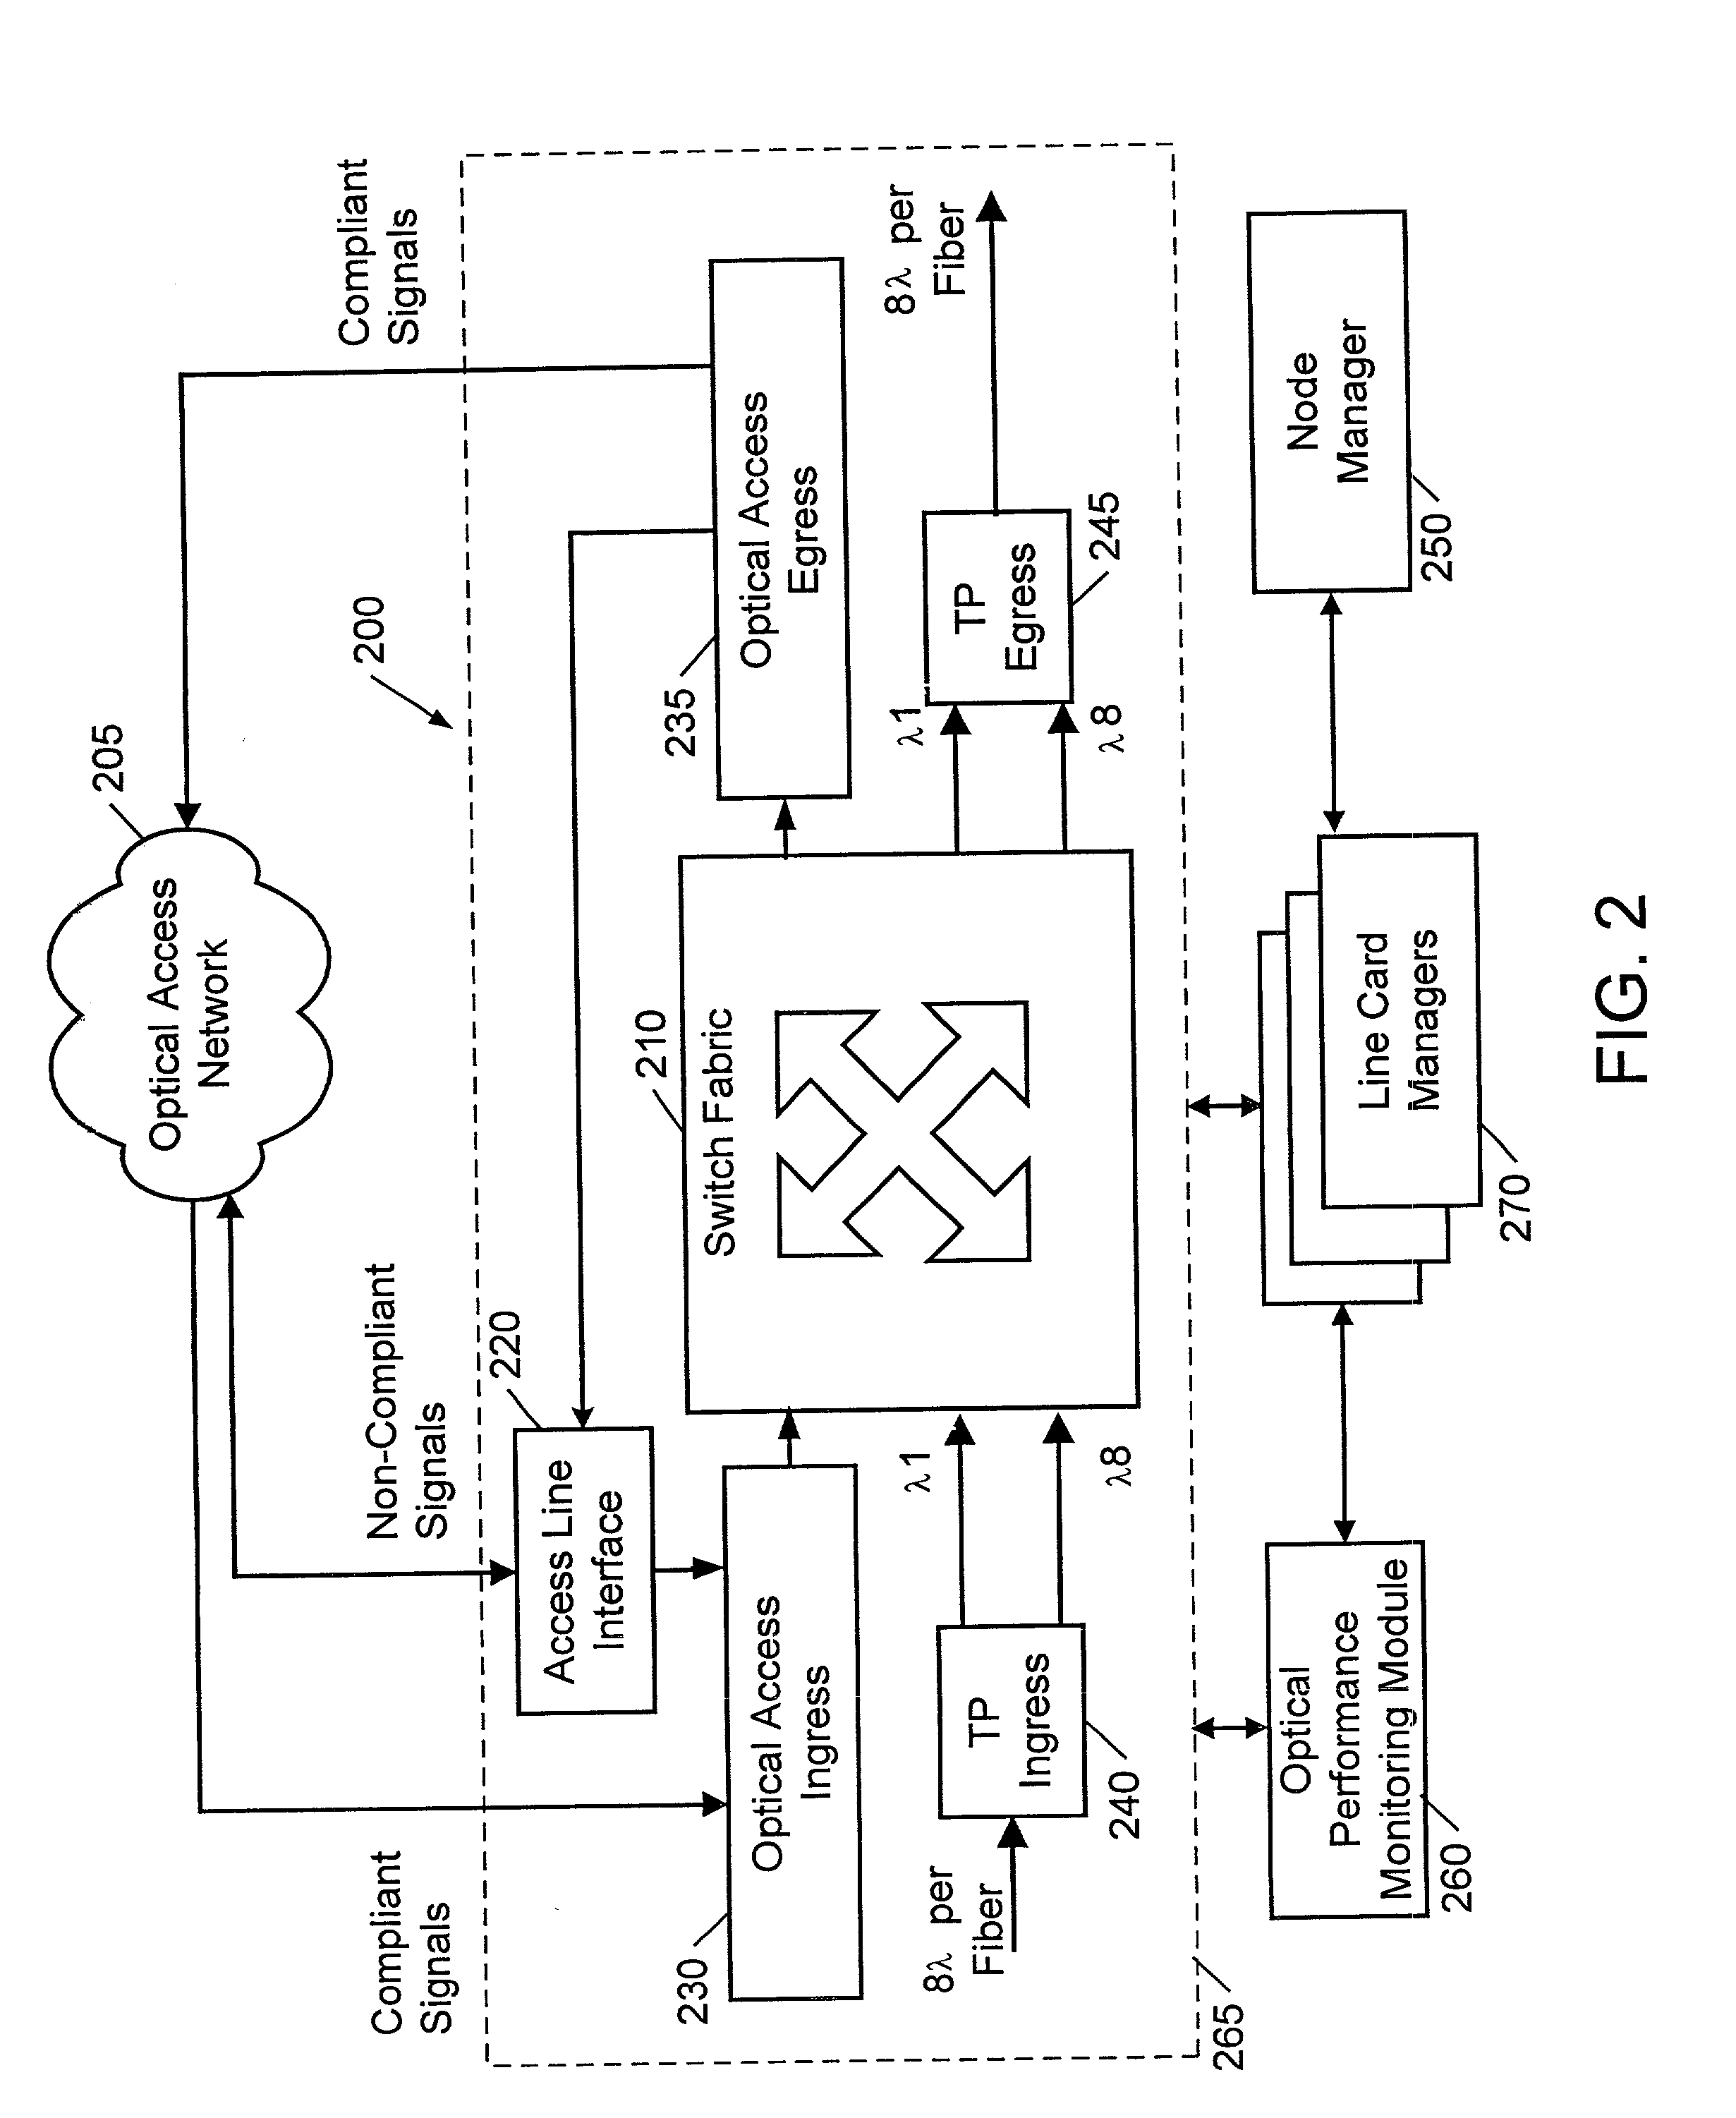 Self-healing hierarchical network management system, and methods and apparatus therefor